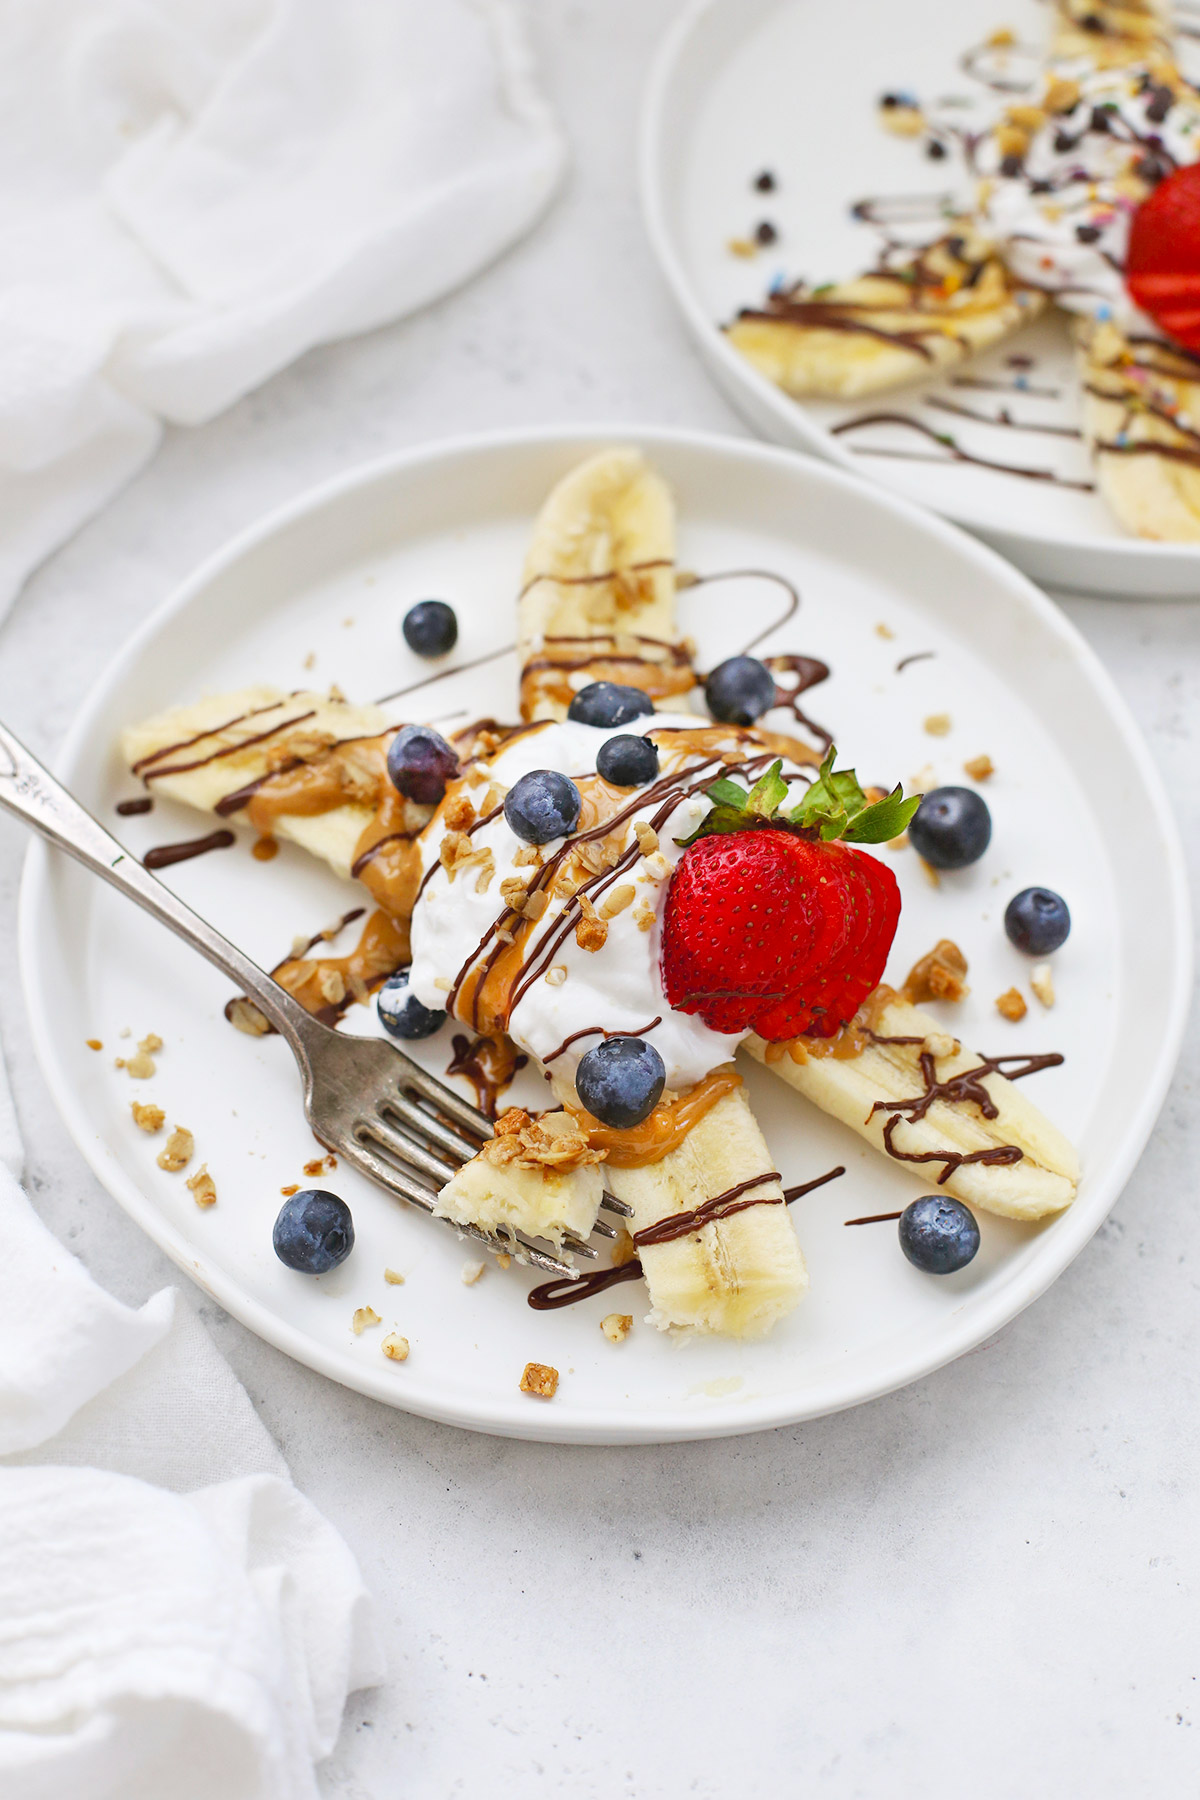 Front view of Healthy Banana Split with Yogurt, Peanut Butter, Chocolate, and berries on a white plate